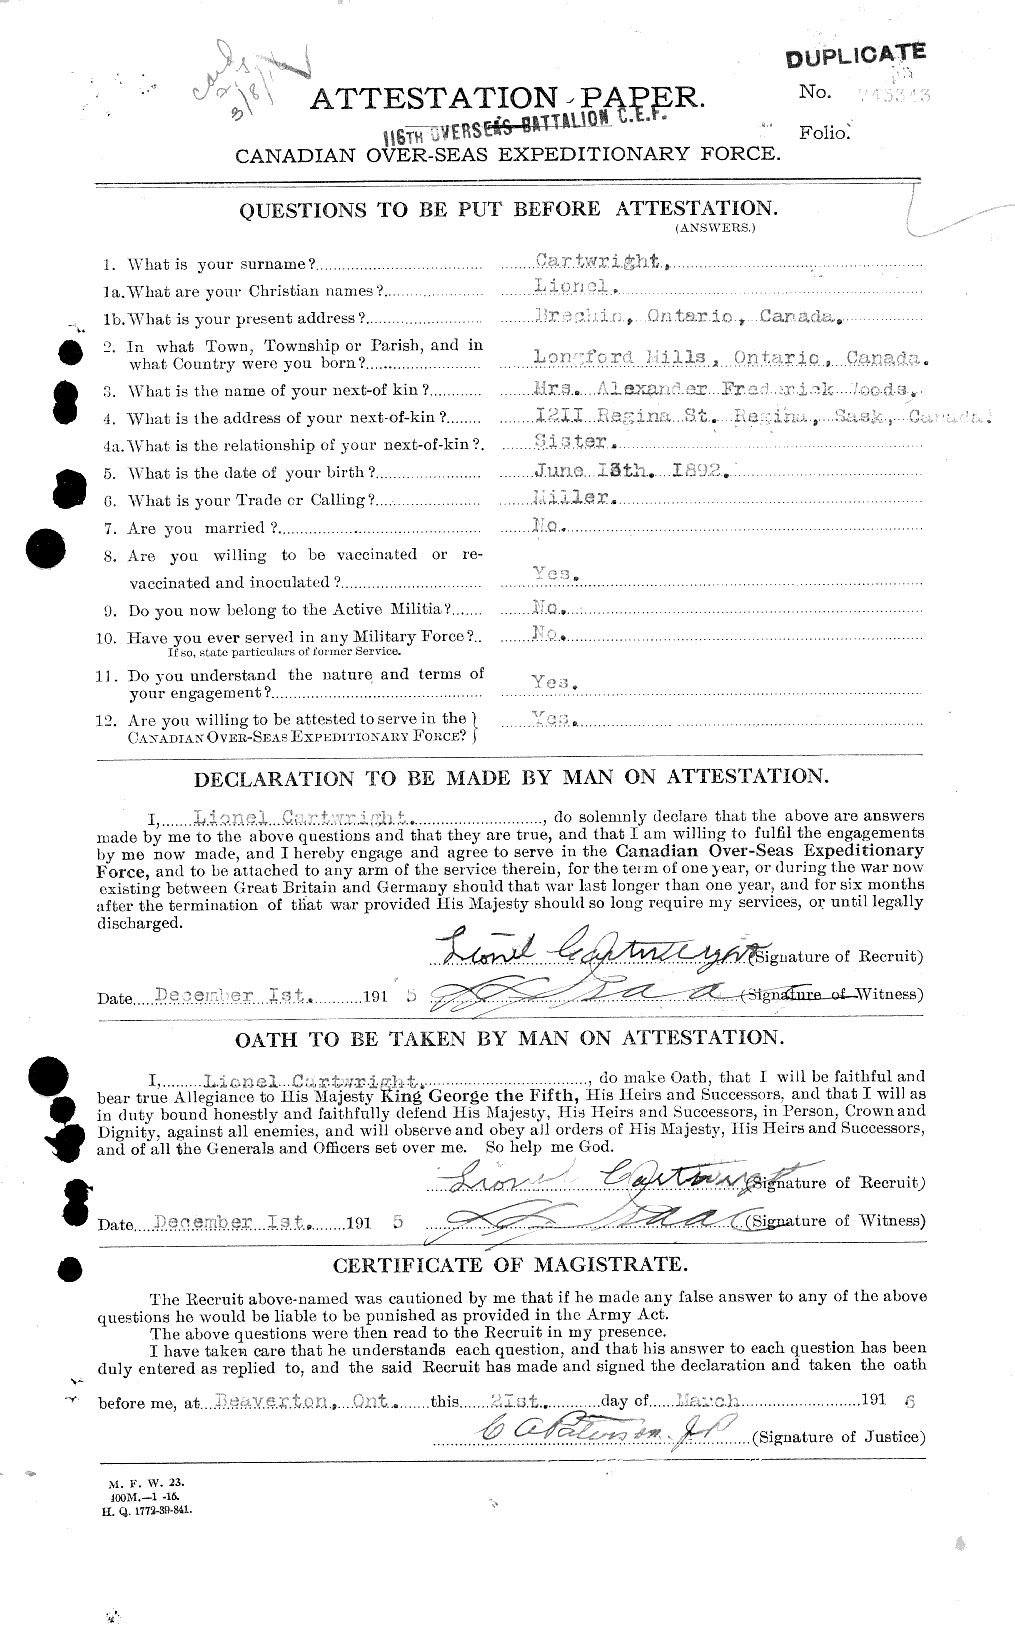 Personnel Records of the First World War - CEF 011609a